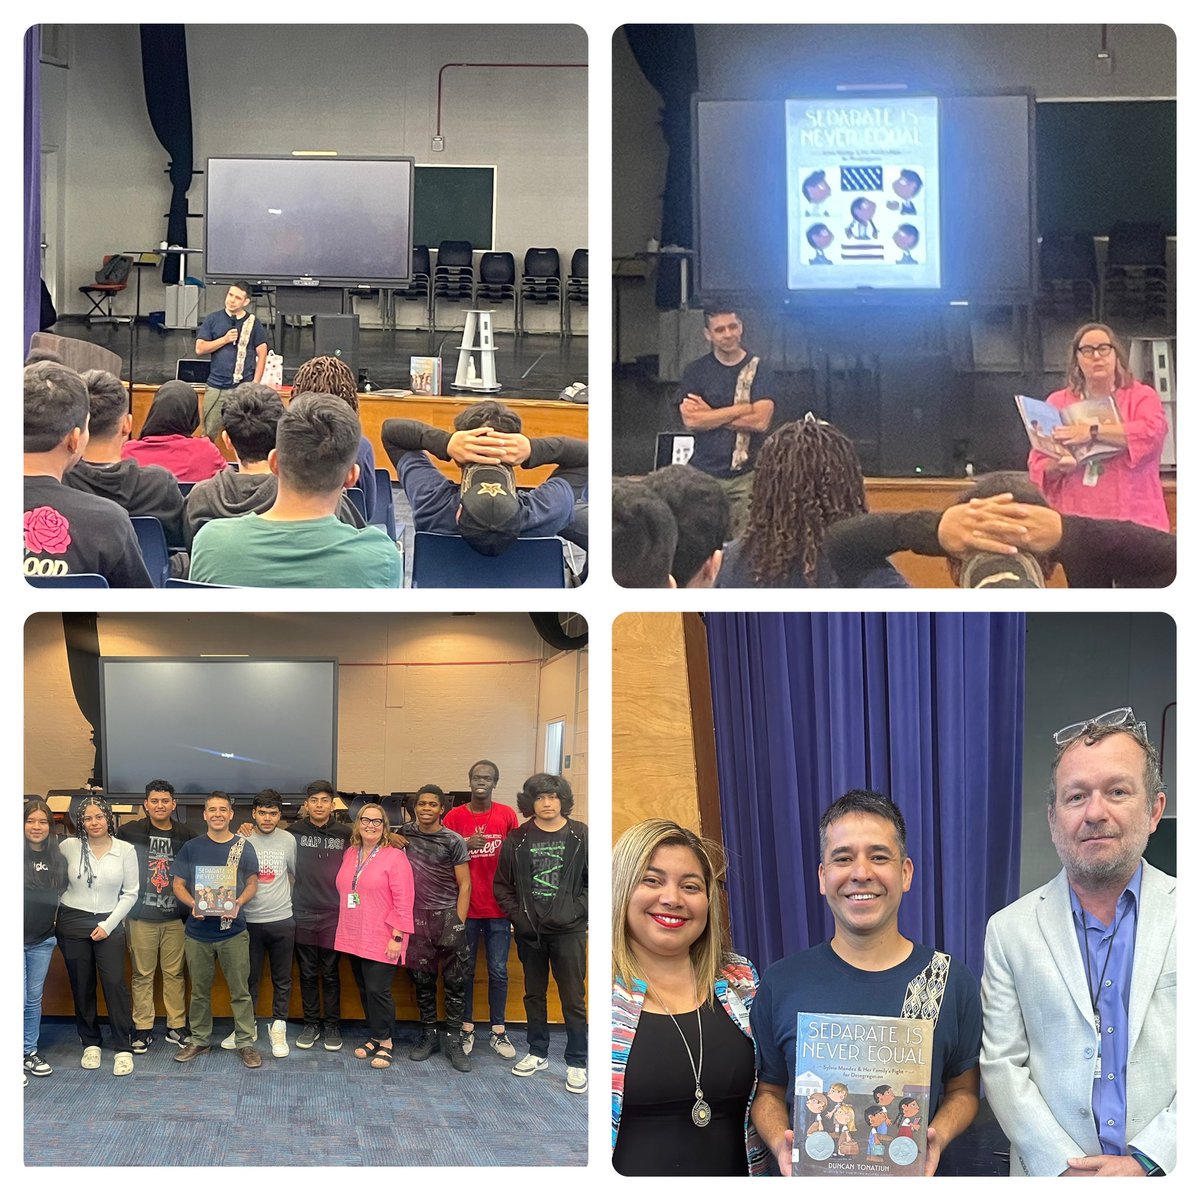 A great start to the day as we enjoyed the visit of @duncantonatiuh Author of many books including “Separate is Never Equal: Sylvia Mendez and Her Family’s Fight for Desegregation” at our own Sylvia Mendez Newcomers School! @GCSchoolsNC @Super_GCS #RepresentationMatters